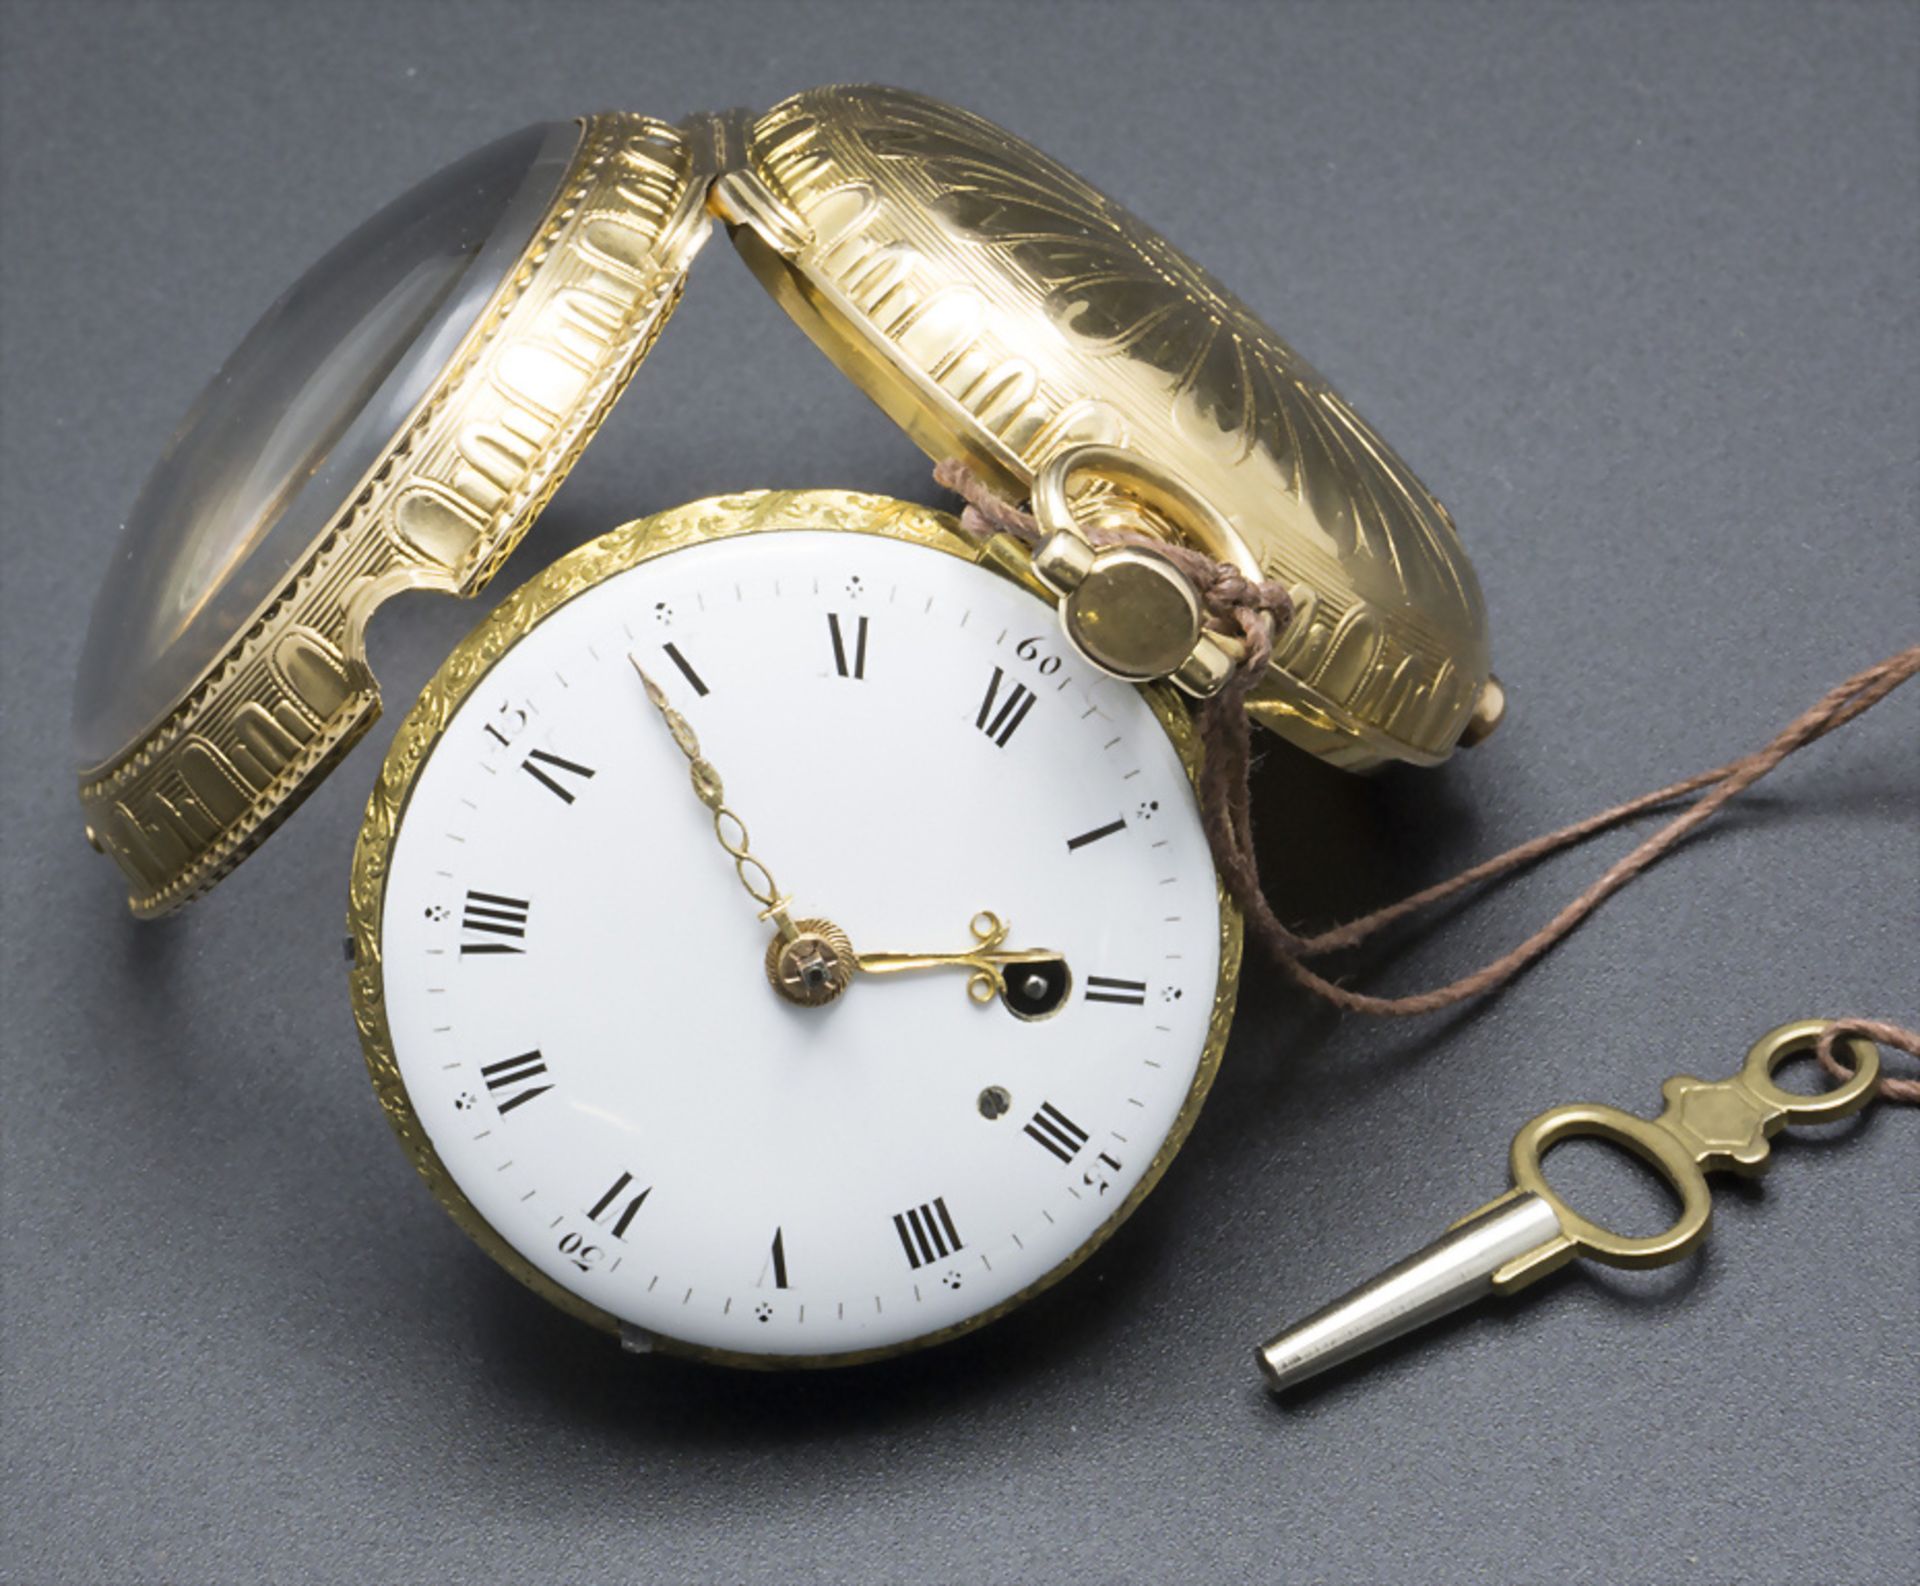 Offene Taschenuhr mit 1/4 Std. Repetition / An 18k gold pocket watch 1/4 quarter repeater, ... - Image 4 of 8